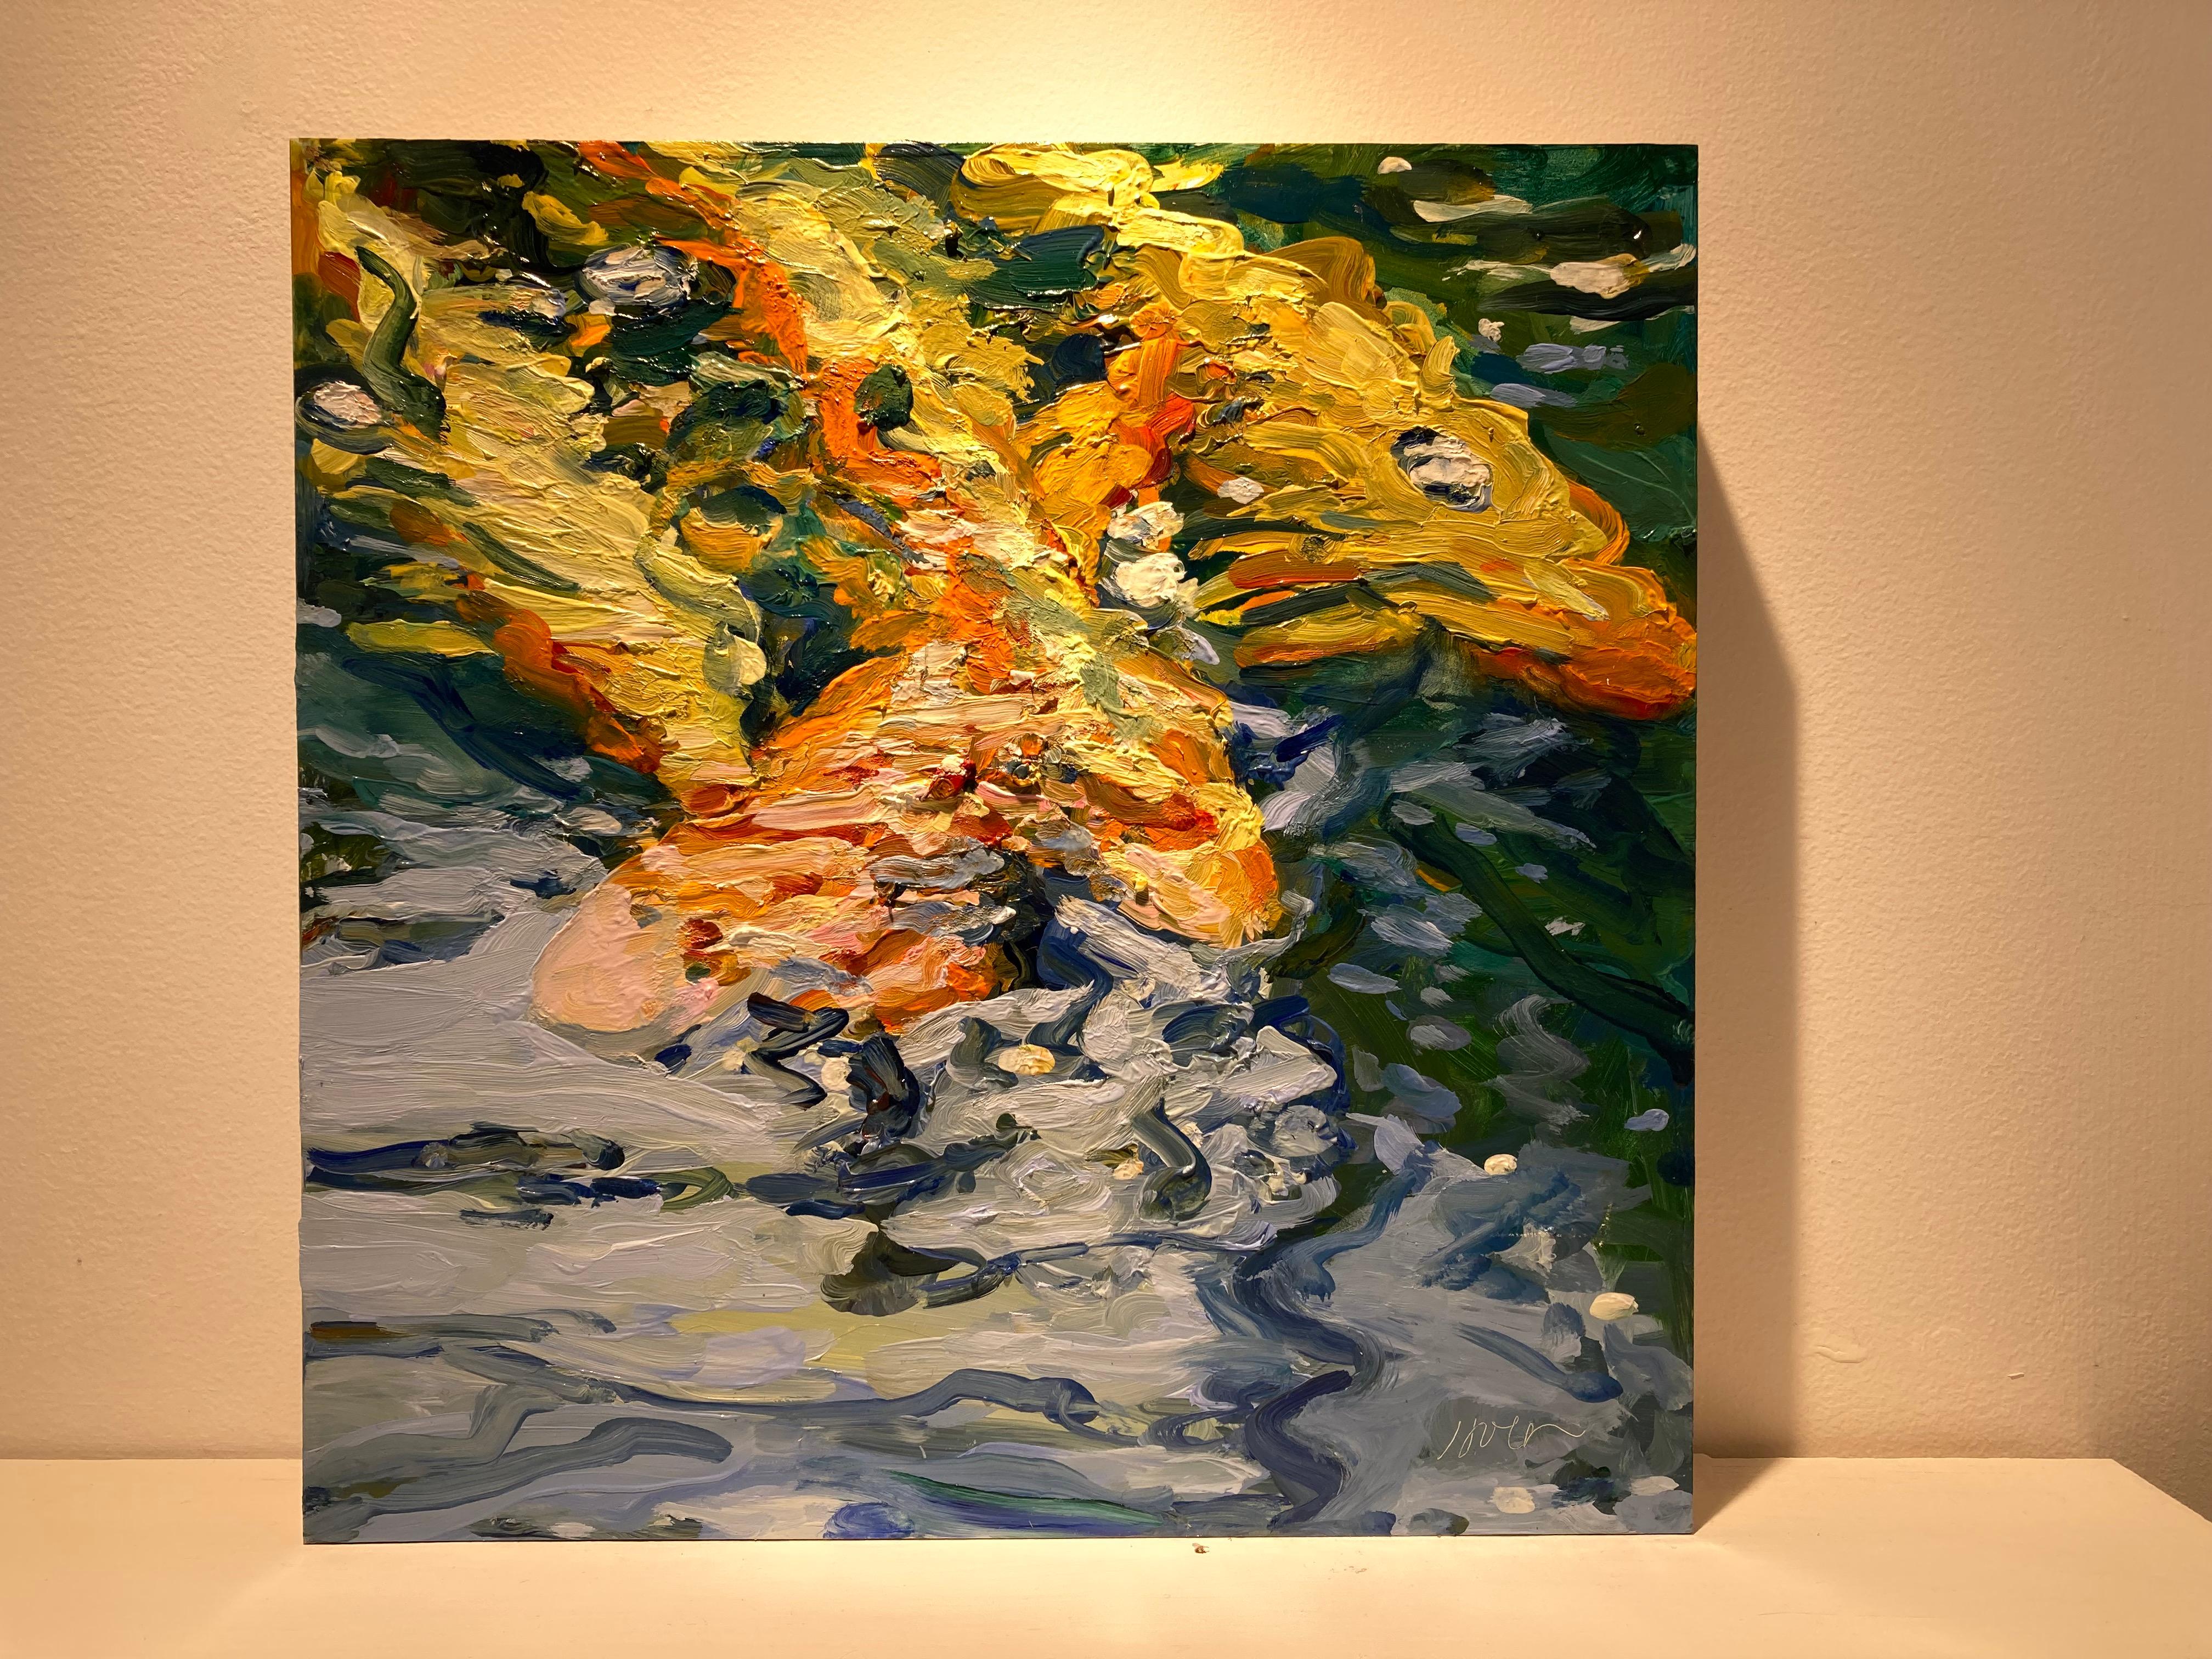 "Koi Fish Underwater Landscape"  Bright yellows oranges, blues, greens, abstract